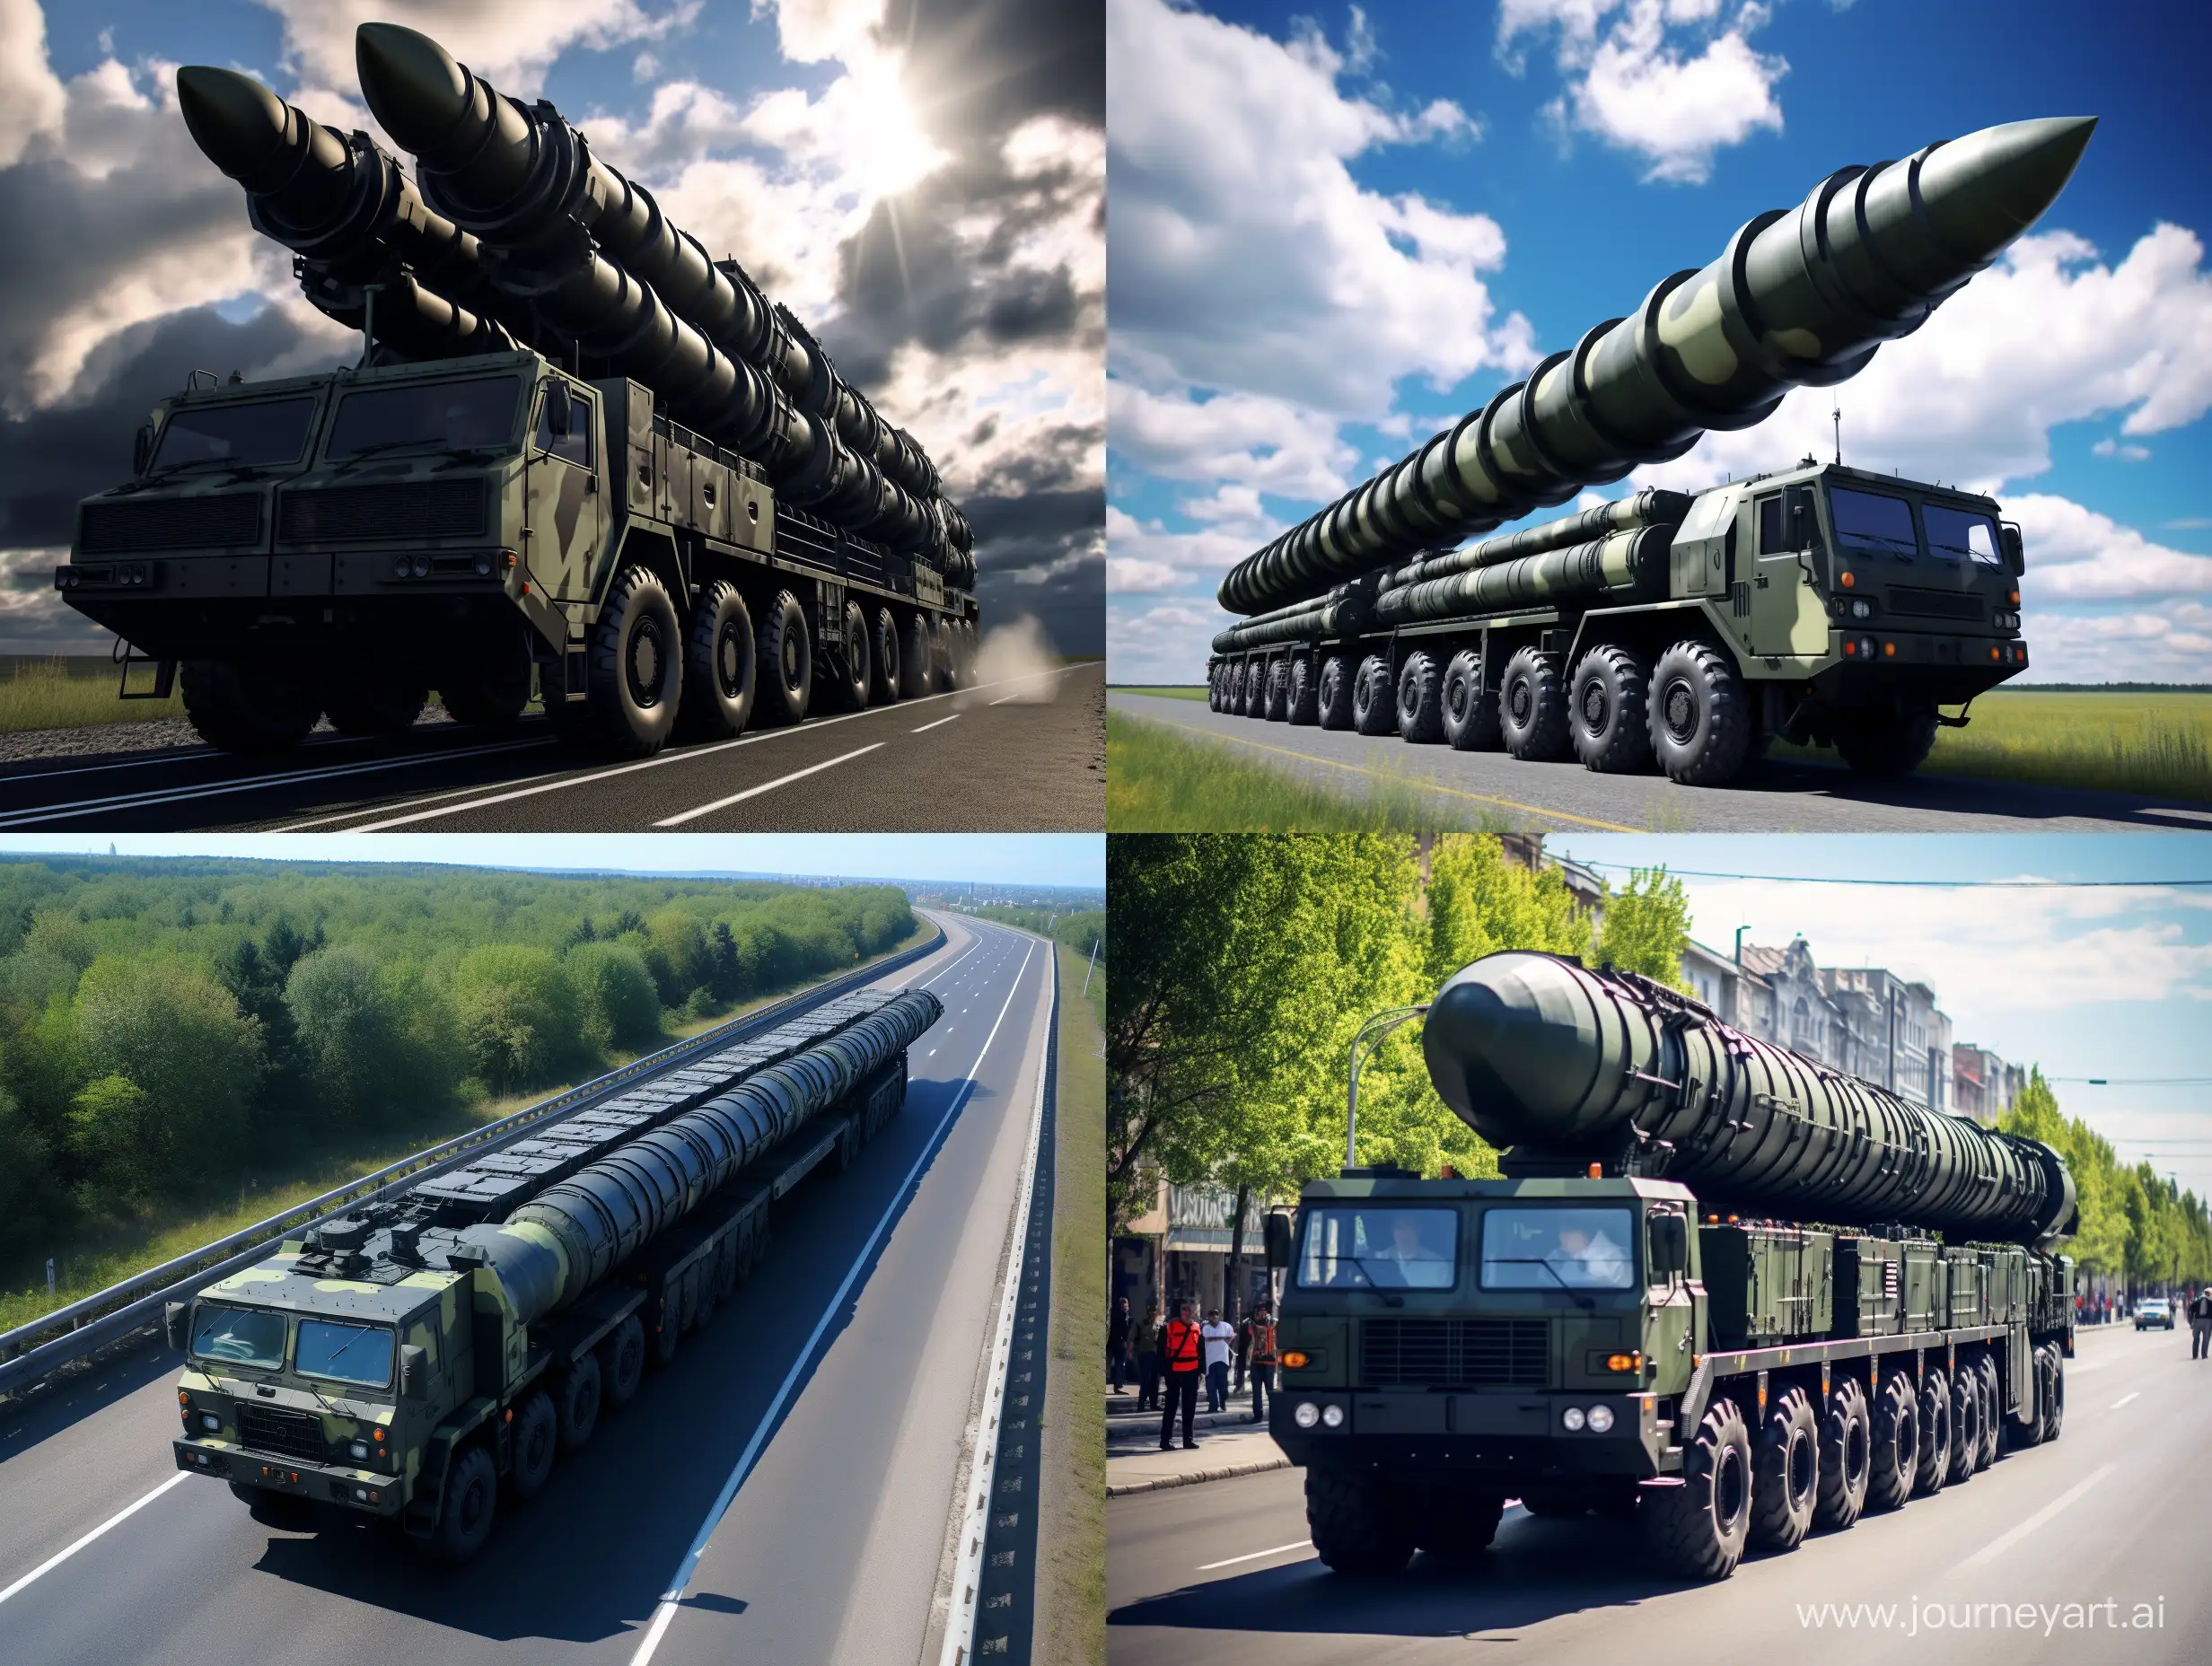 Ukraines-Army-Showcasing-SS18-ICBM-Warheads-Third-Largest-Nuclear-Arsenal